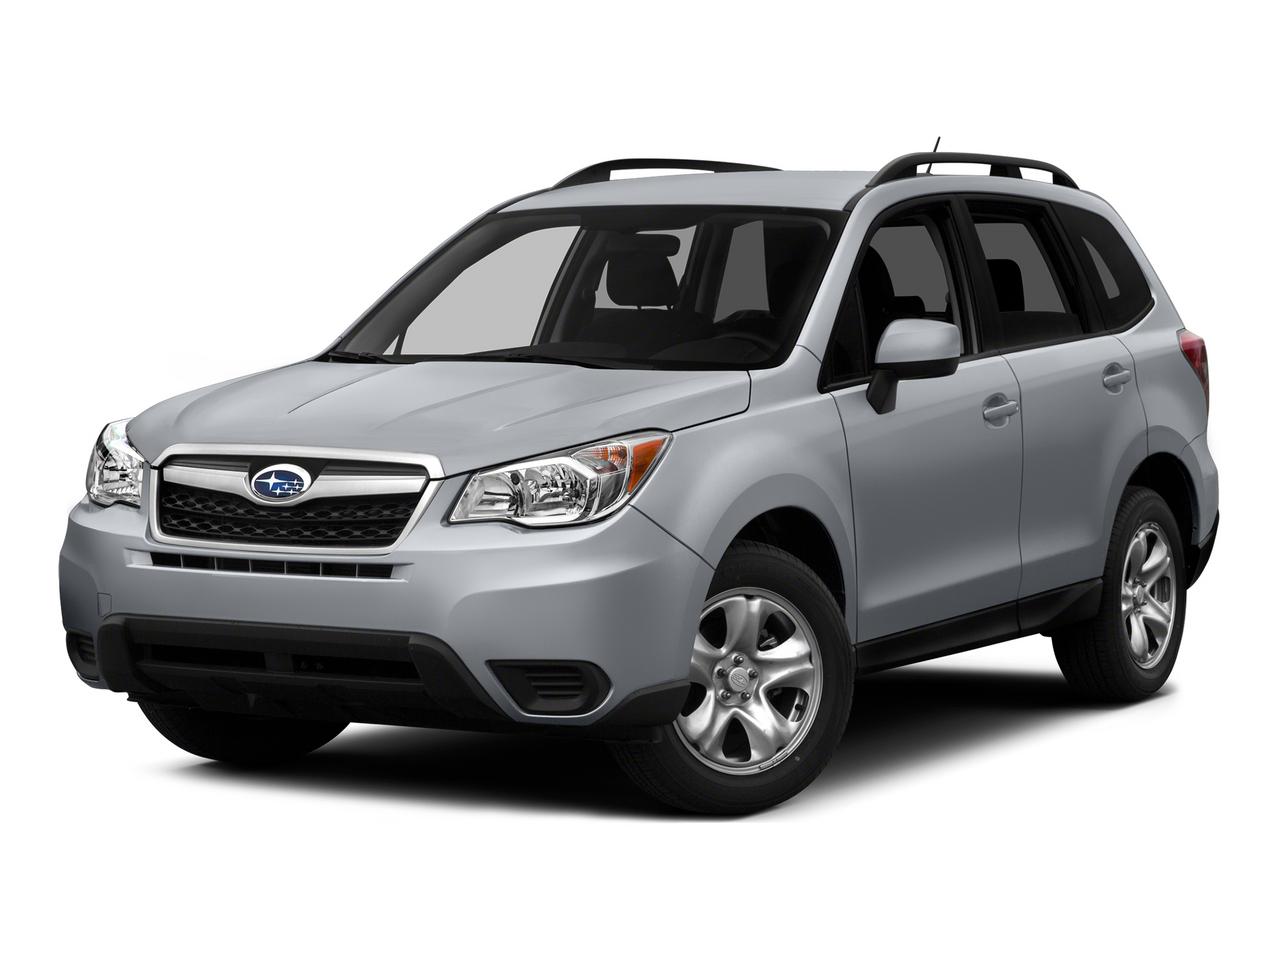 Used 2015 Subaru Forester 2.5i Touring in Jasmine Green